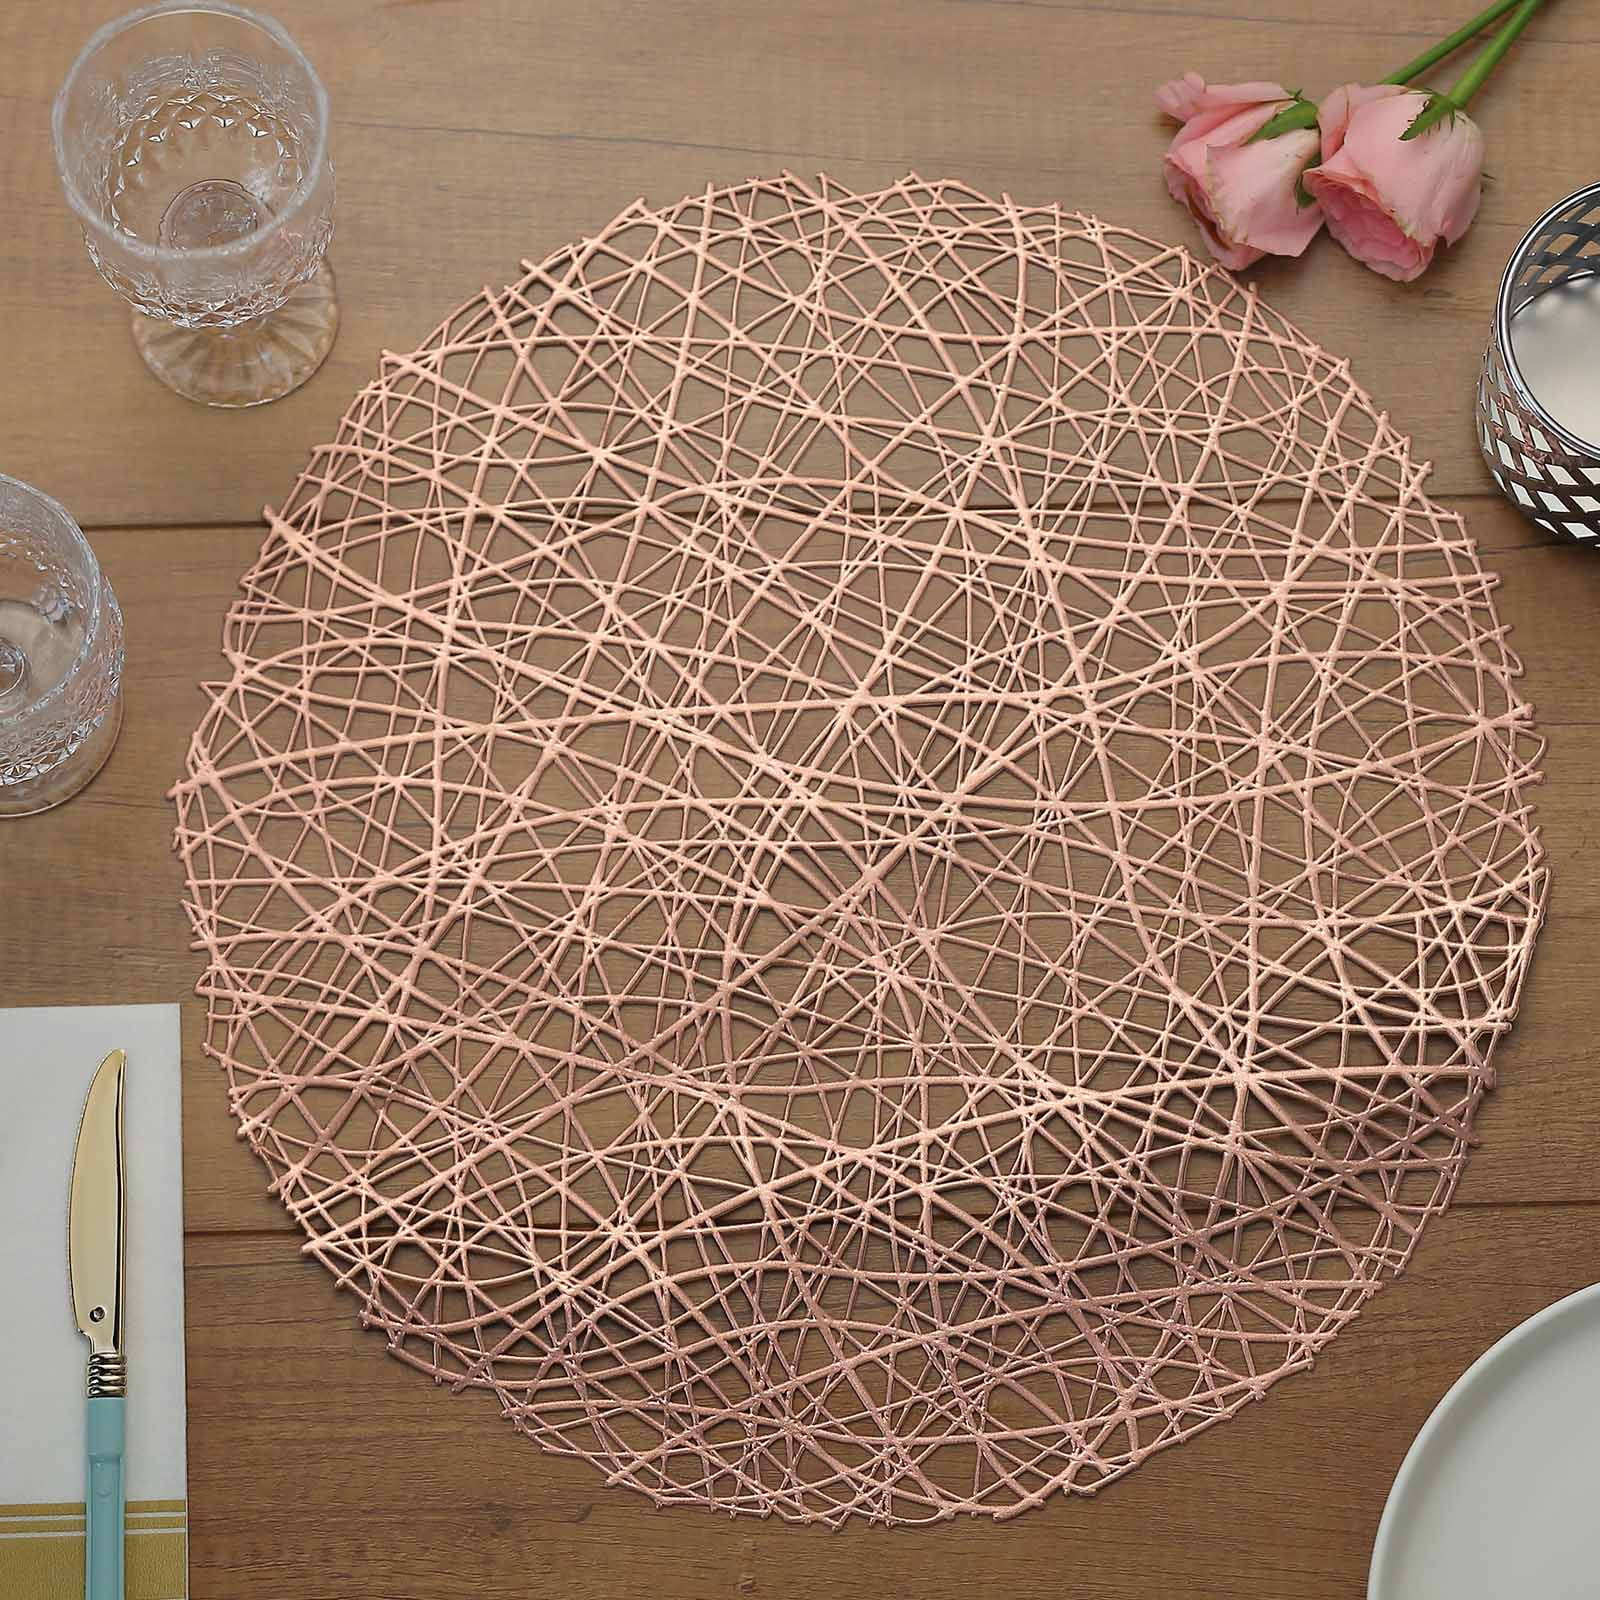 6 Pack 15 Rose Gold Metallic Non-Slip Placemats, Wheat Design Round Vinyl Table Mats | by Tableclothsfactory